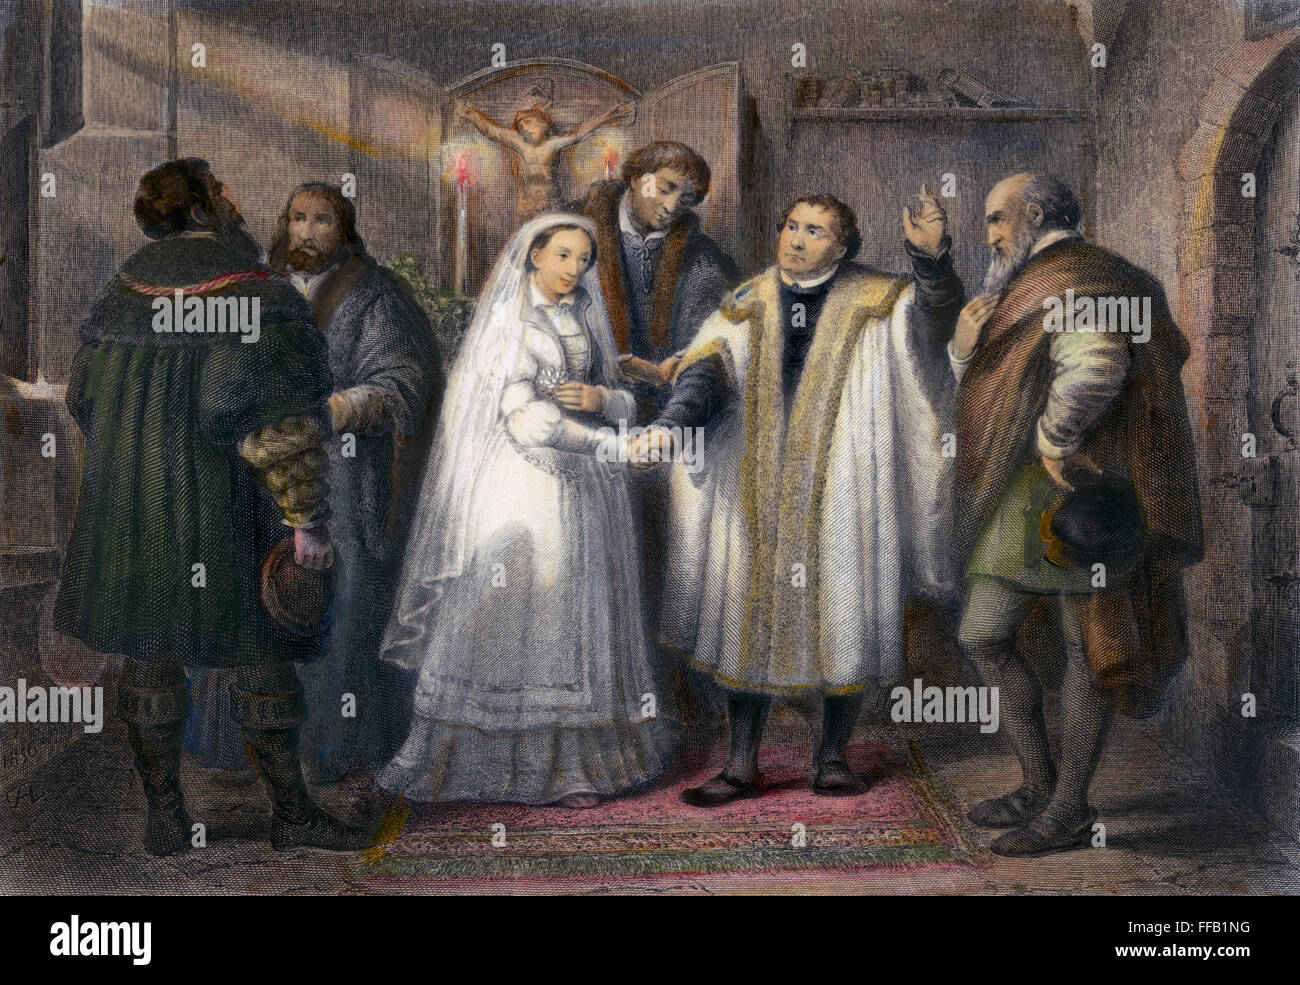 MARTIN LUTHER (1483-1546). /nGerman religious reformer. Luther's marriage to the former nun, Katharina von Bora, in 1525. Steel engraving, 19th cetury. Stock Photo